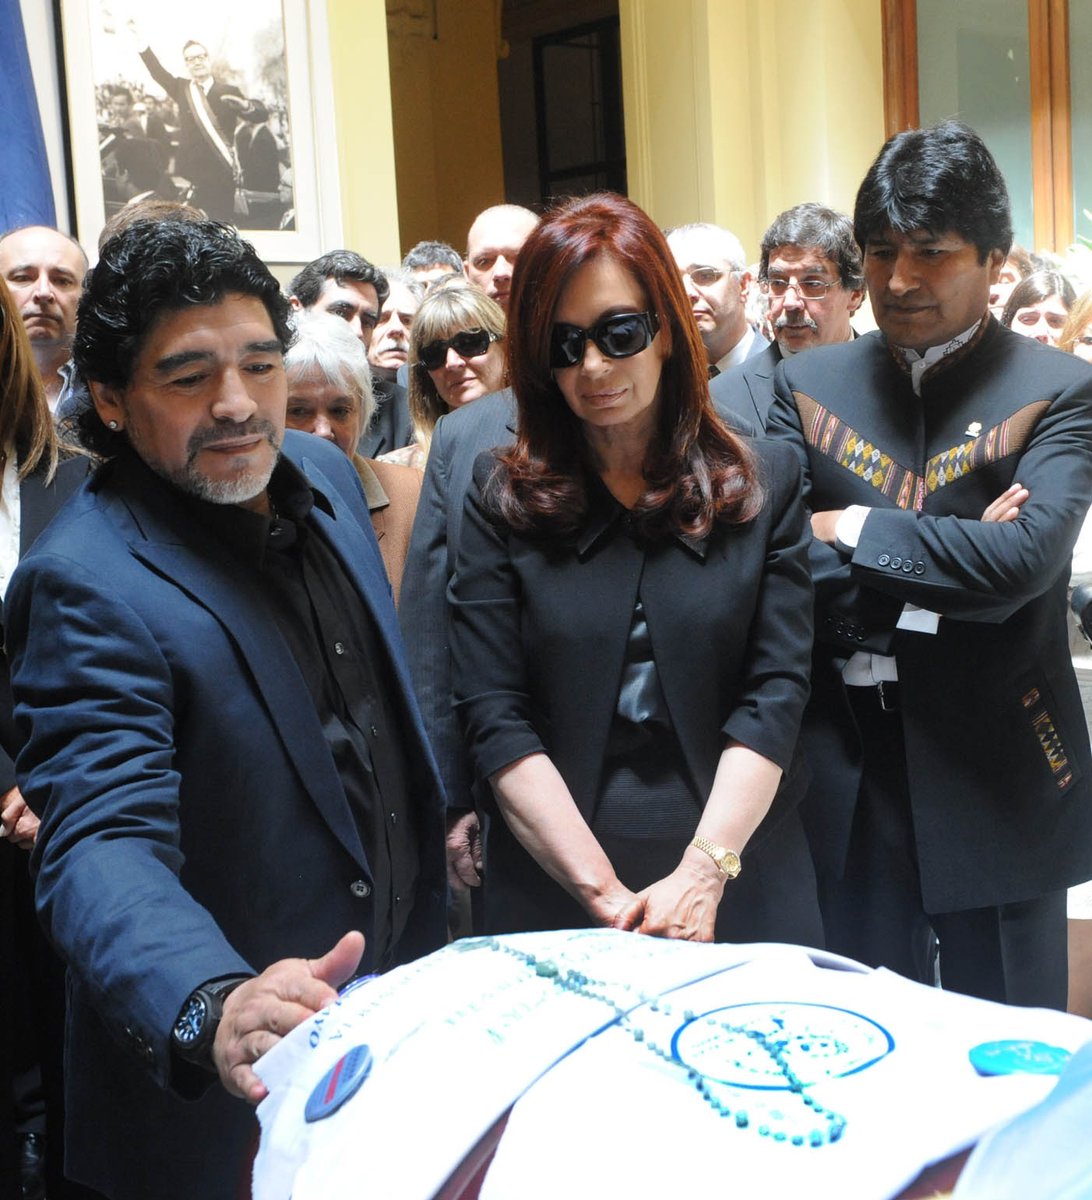 Maradona strongly supported the wave of leftist govts in Latin America—the "Pink Tide"Here he is in 2010 at funeral of Argentina's left-wing President Néstor Kirchner, with his wife (future president) Cristina and Bolivia's Evo MoralesPortrait of Chile's Allende in background